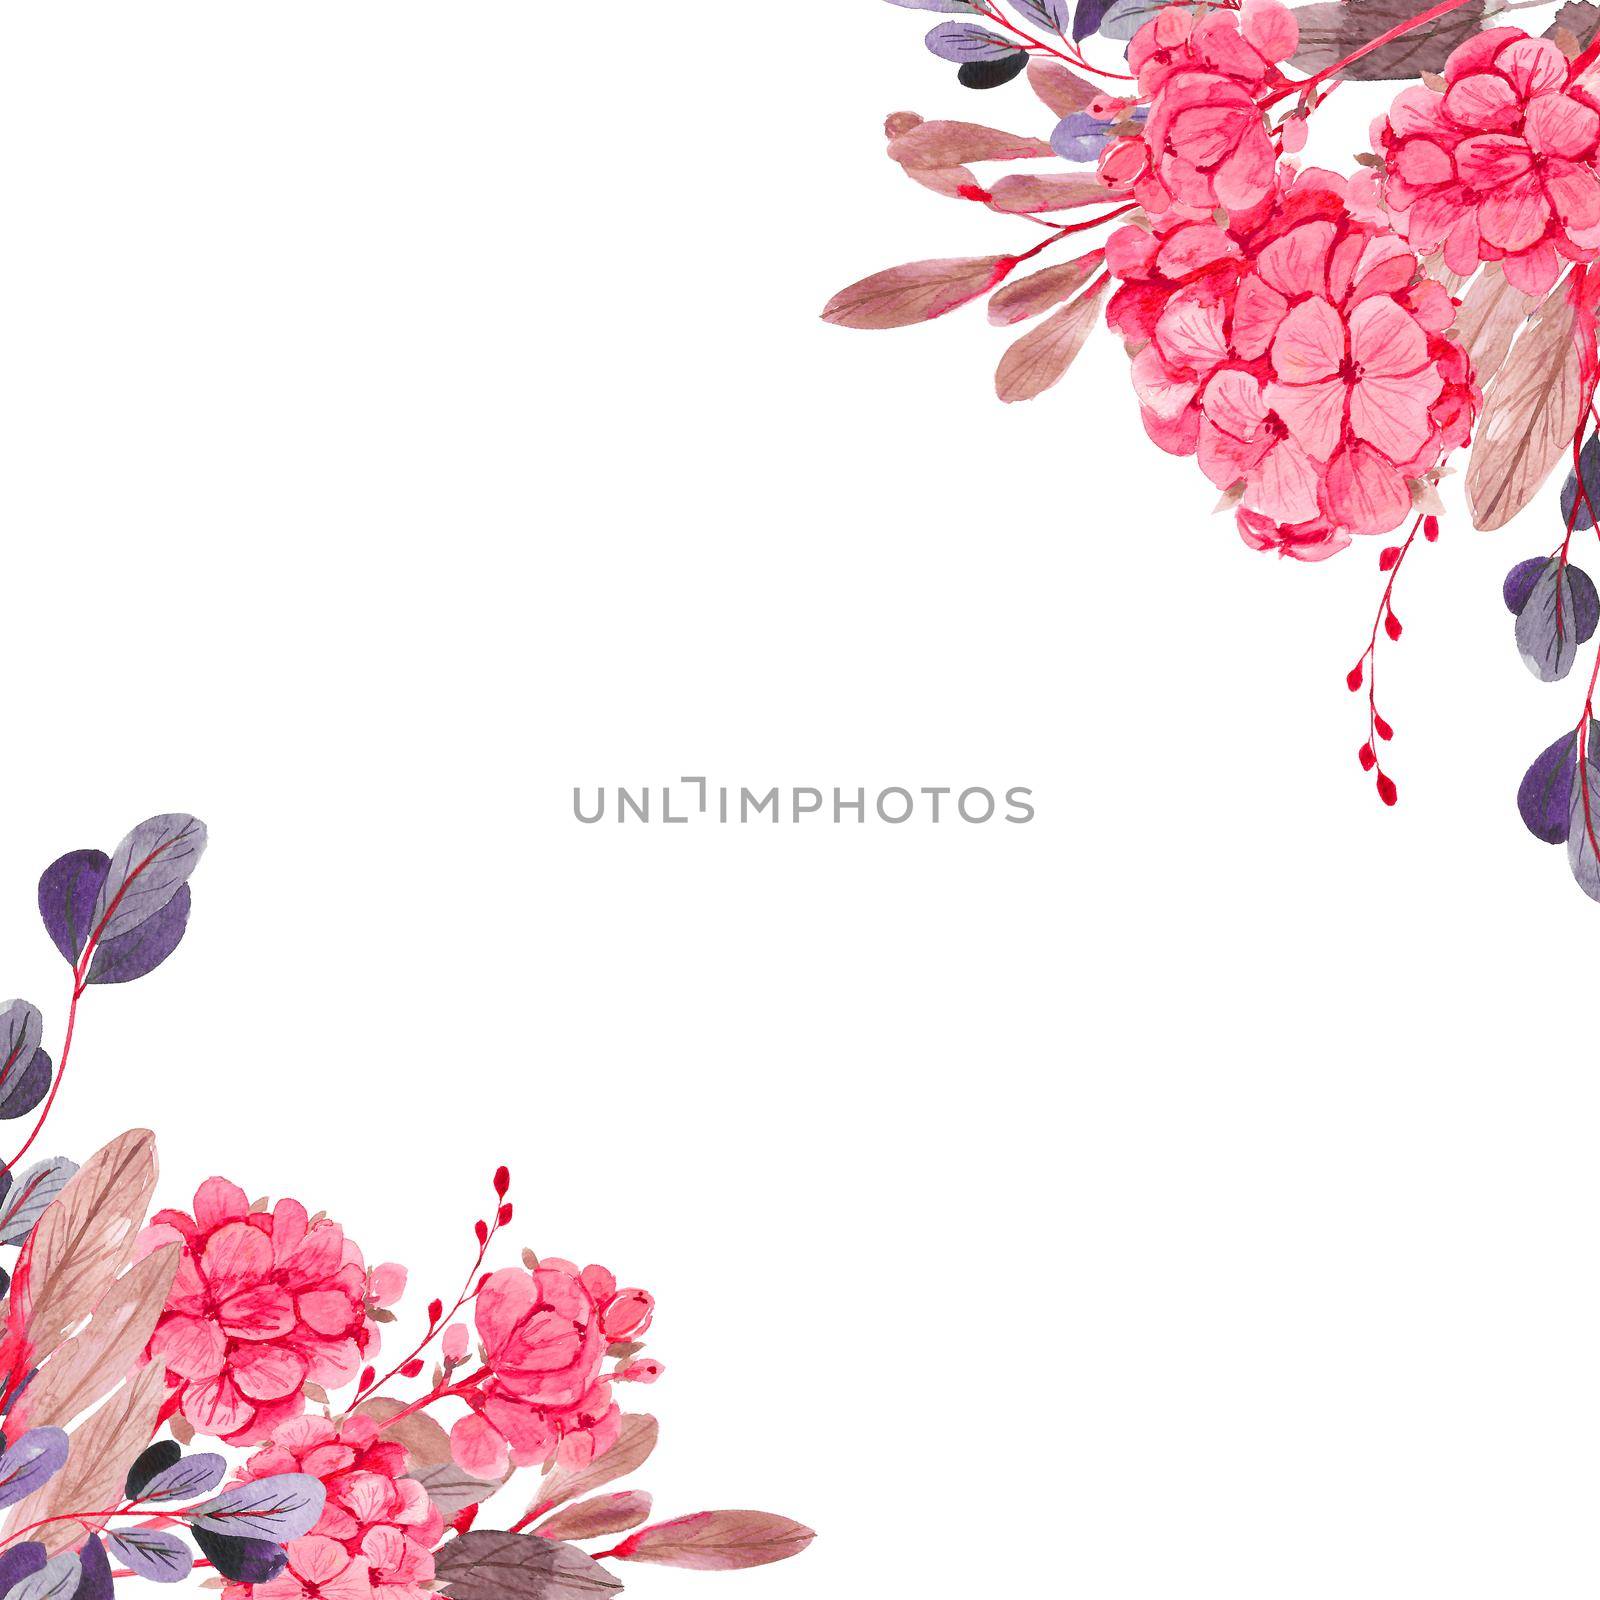 watercolor flower backgrounds . Luxury minimalist style wallpaper with pink flowers and botanical leaves, organic shapes